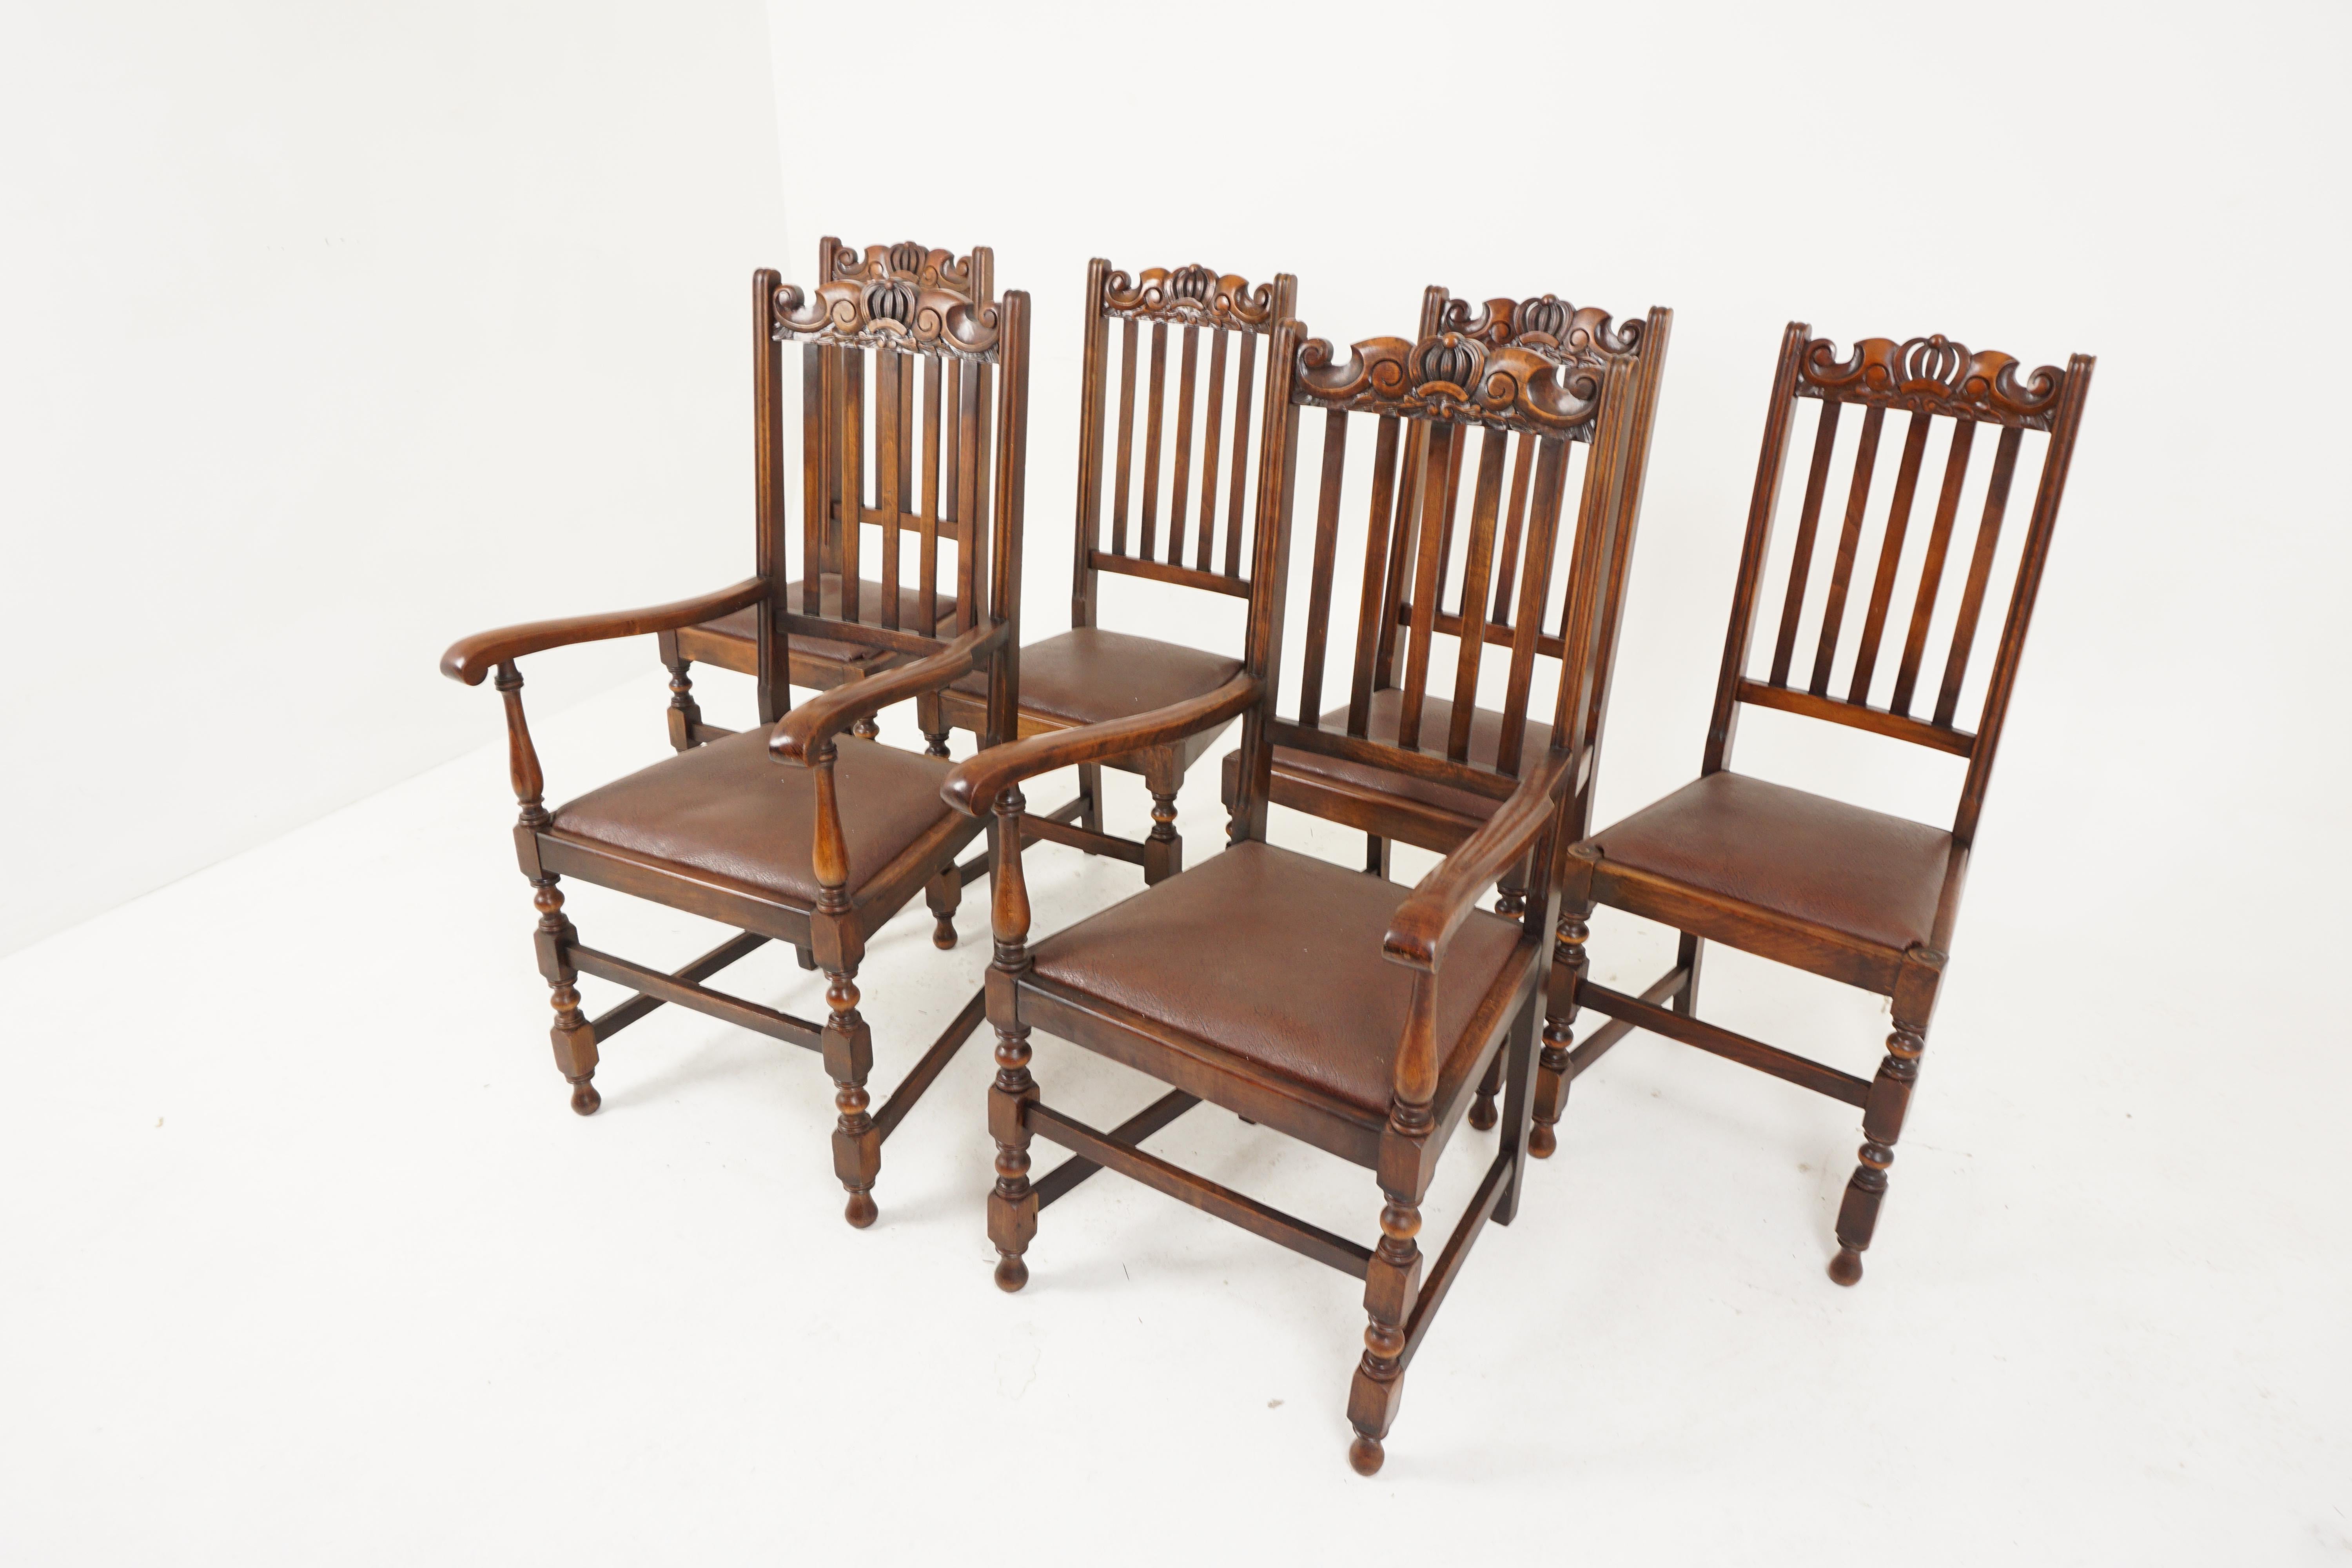 Antique dining chair, set of 6, carved oak, turned legs, Scotland 1920, B2674

Scotland 1920
Solid oak
Original finish
Carved top rail 
Five vertical slats
Lift out vinyl covered seats
Standing on turned legs to the front
With 3 stretchers